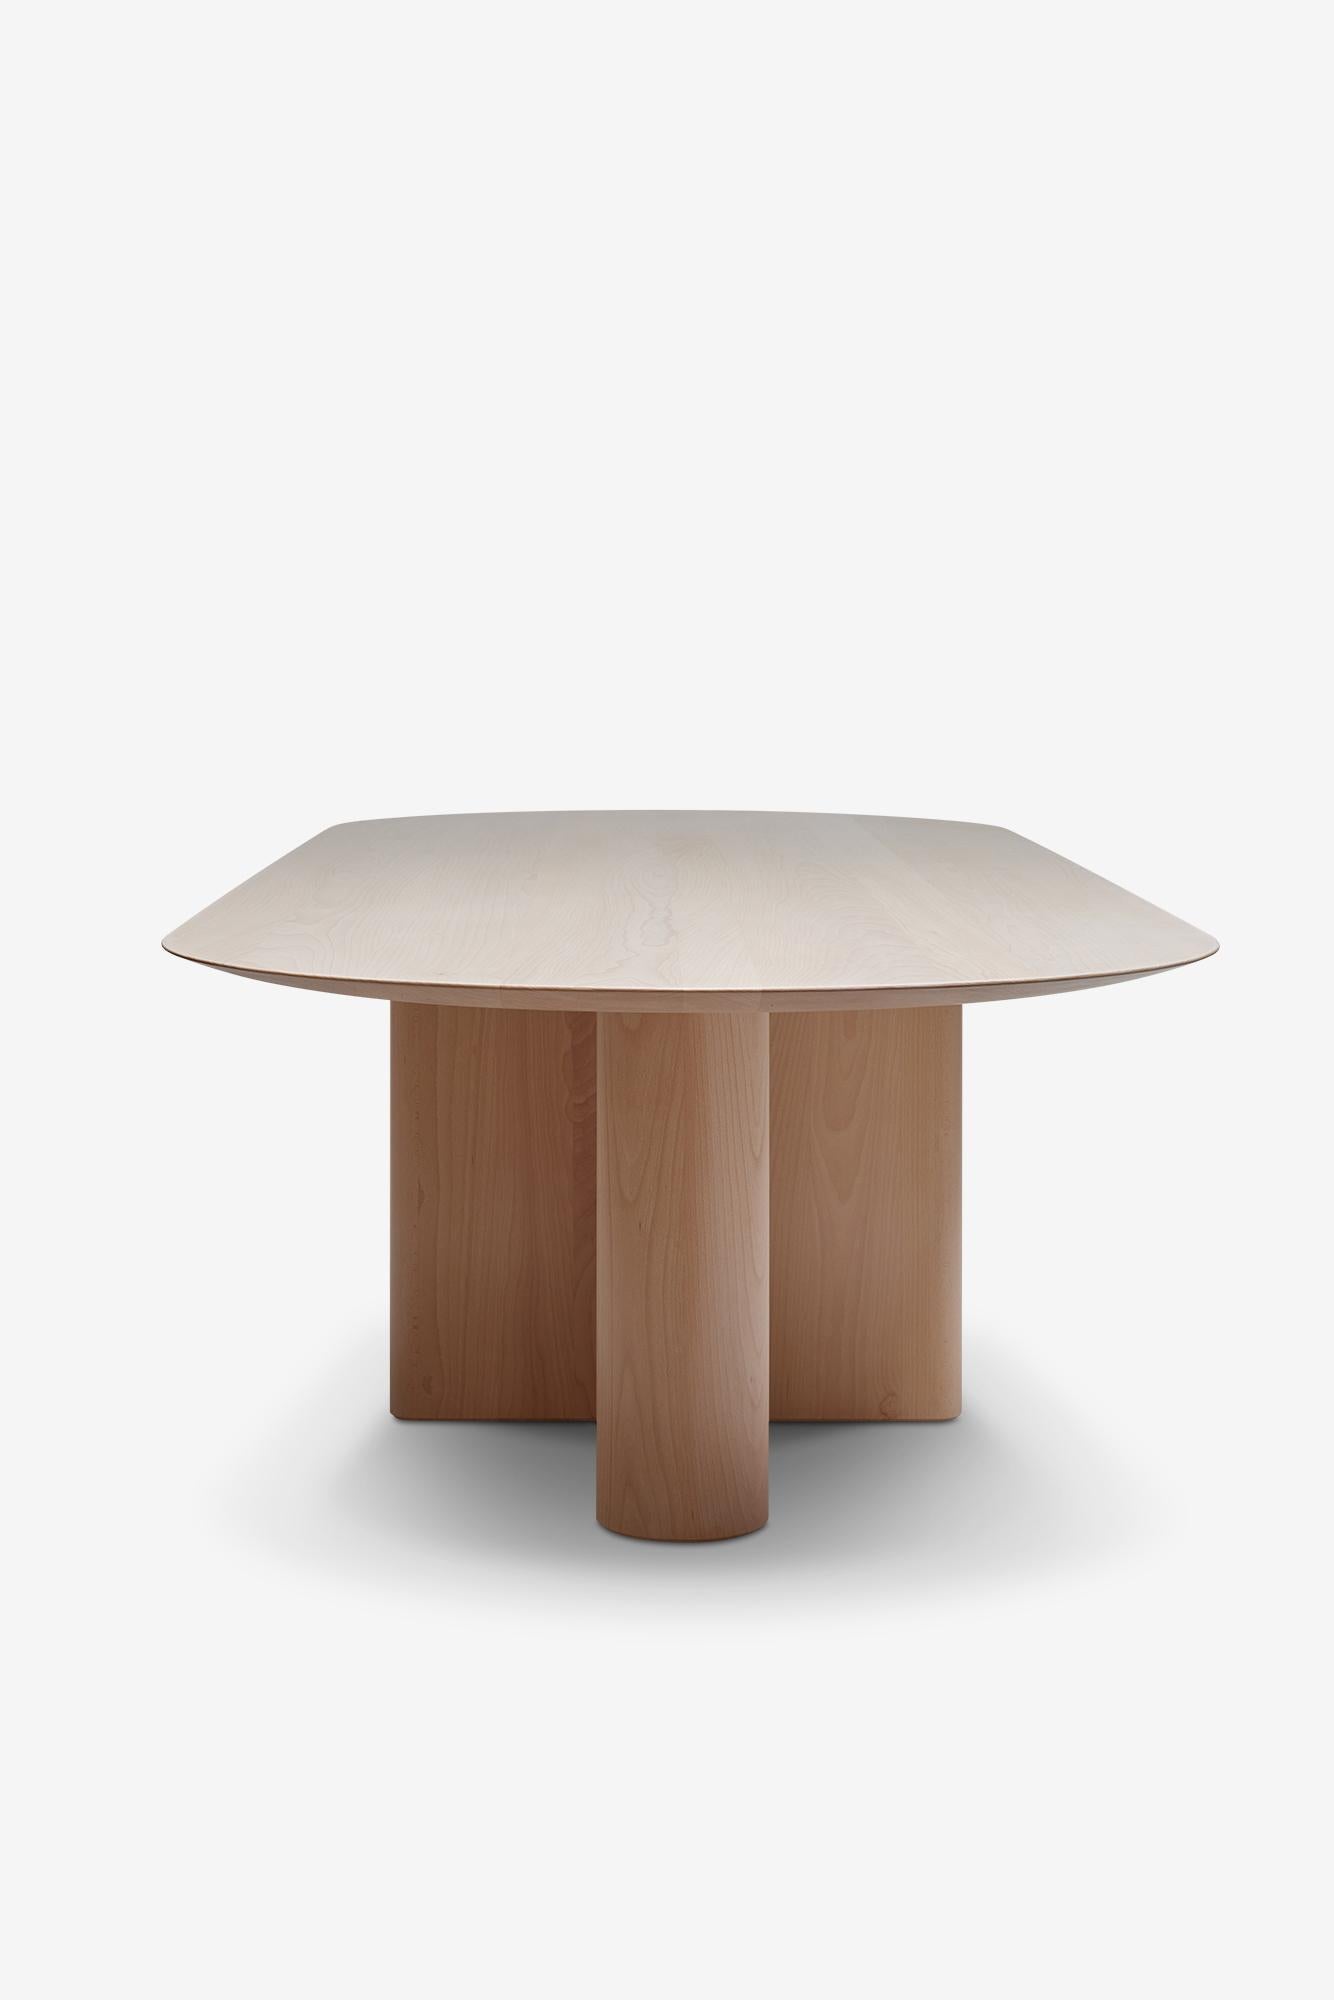 MG210 Dining Table in Danish beech by Malte Gormsen design by Norm Architects In New Condition For Sale In Copenhagen, DK